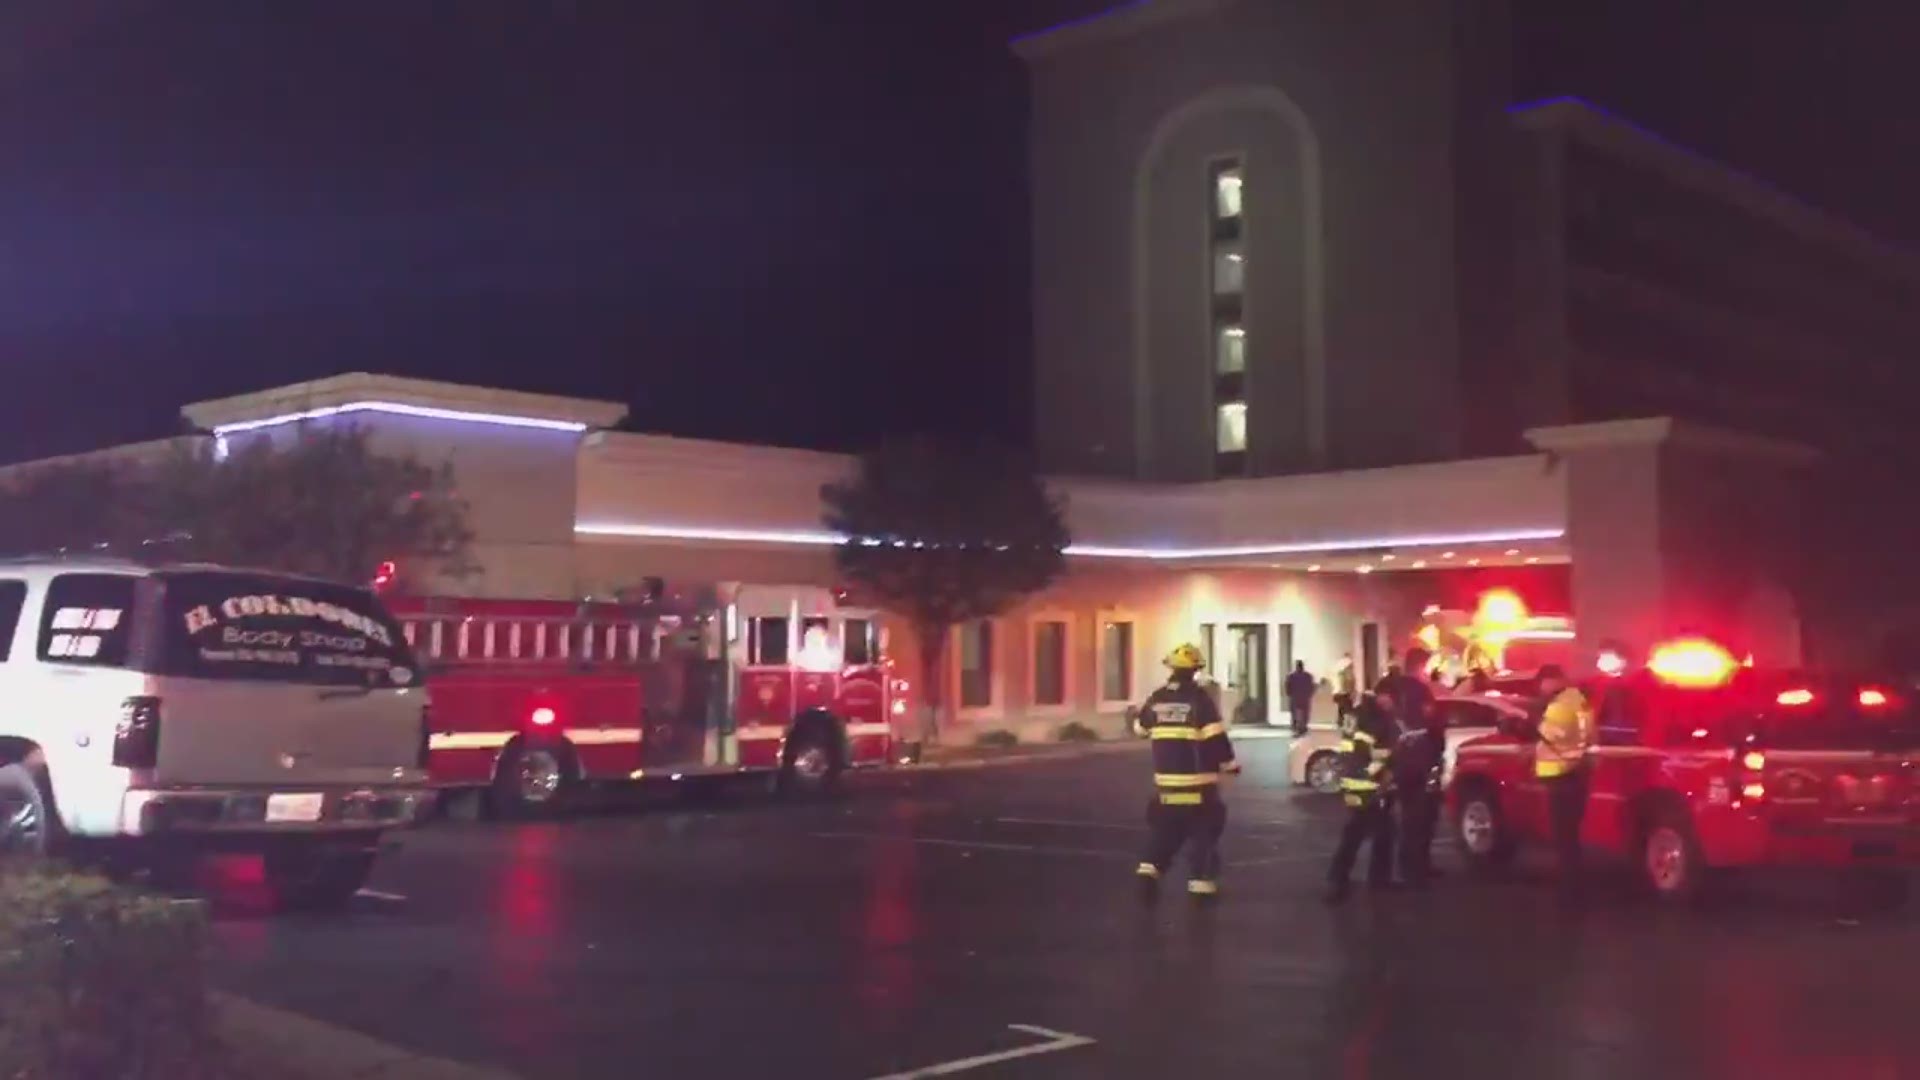 Winston-Salem Fire Department evacuated the Quality Inn hotel on Akron Drive after a fire on 3rd floor. No injuries were reported.